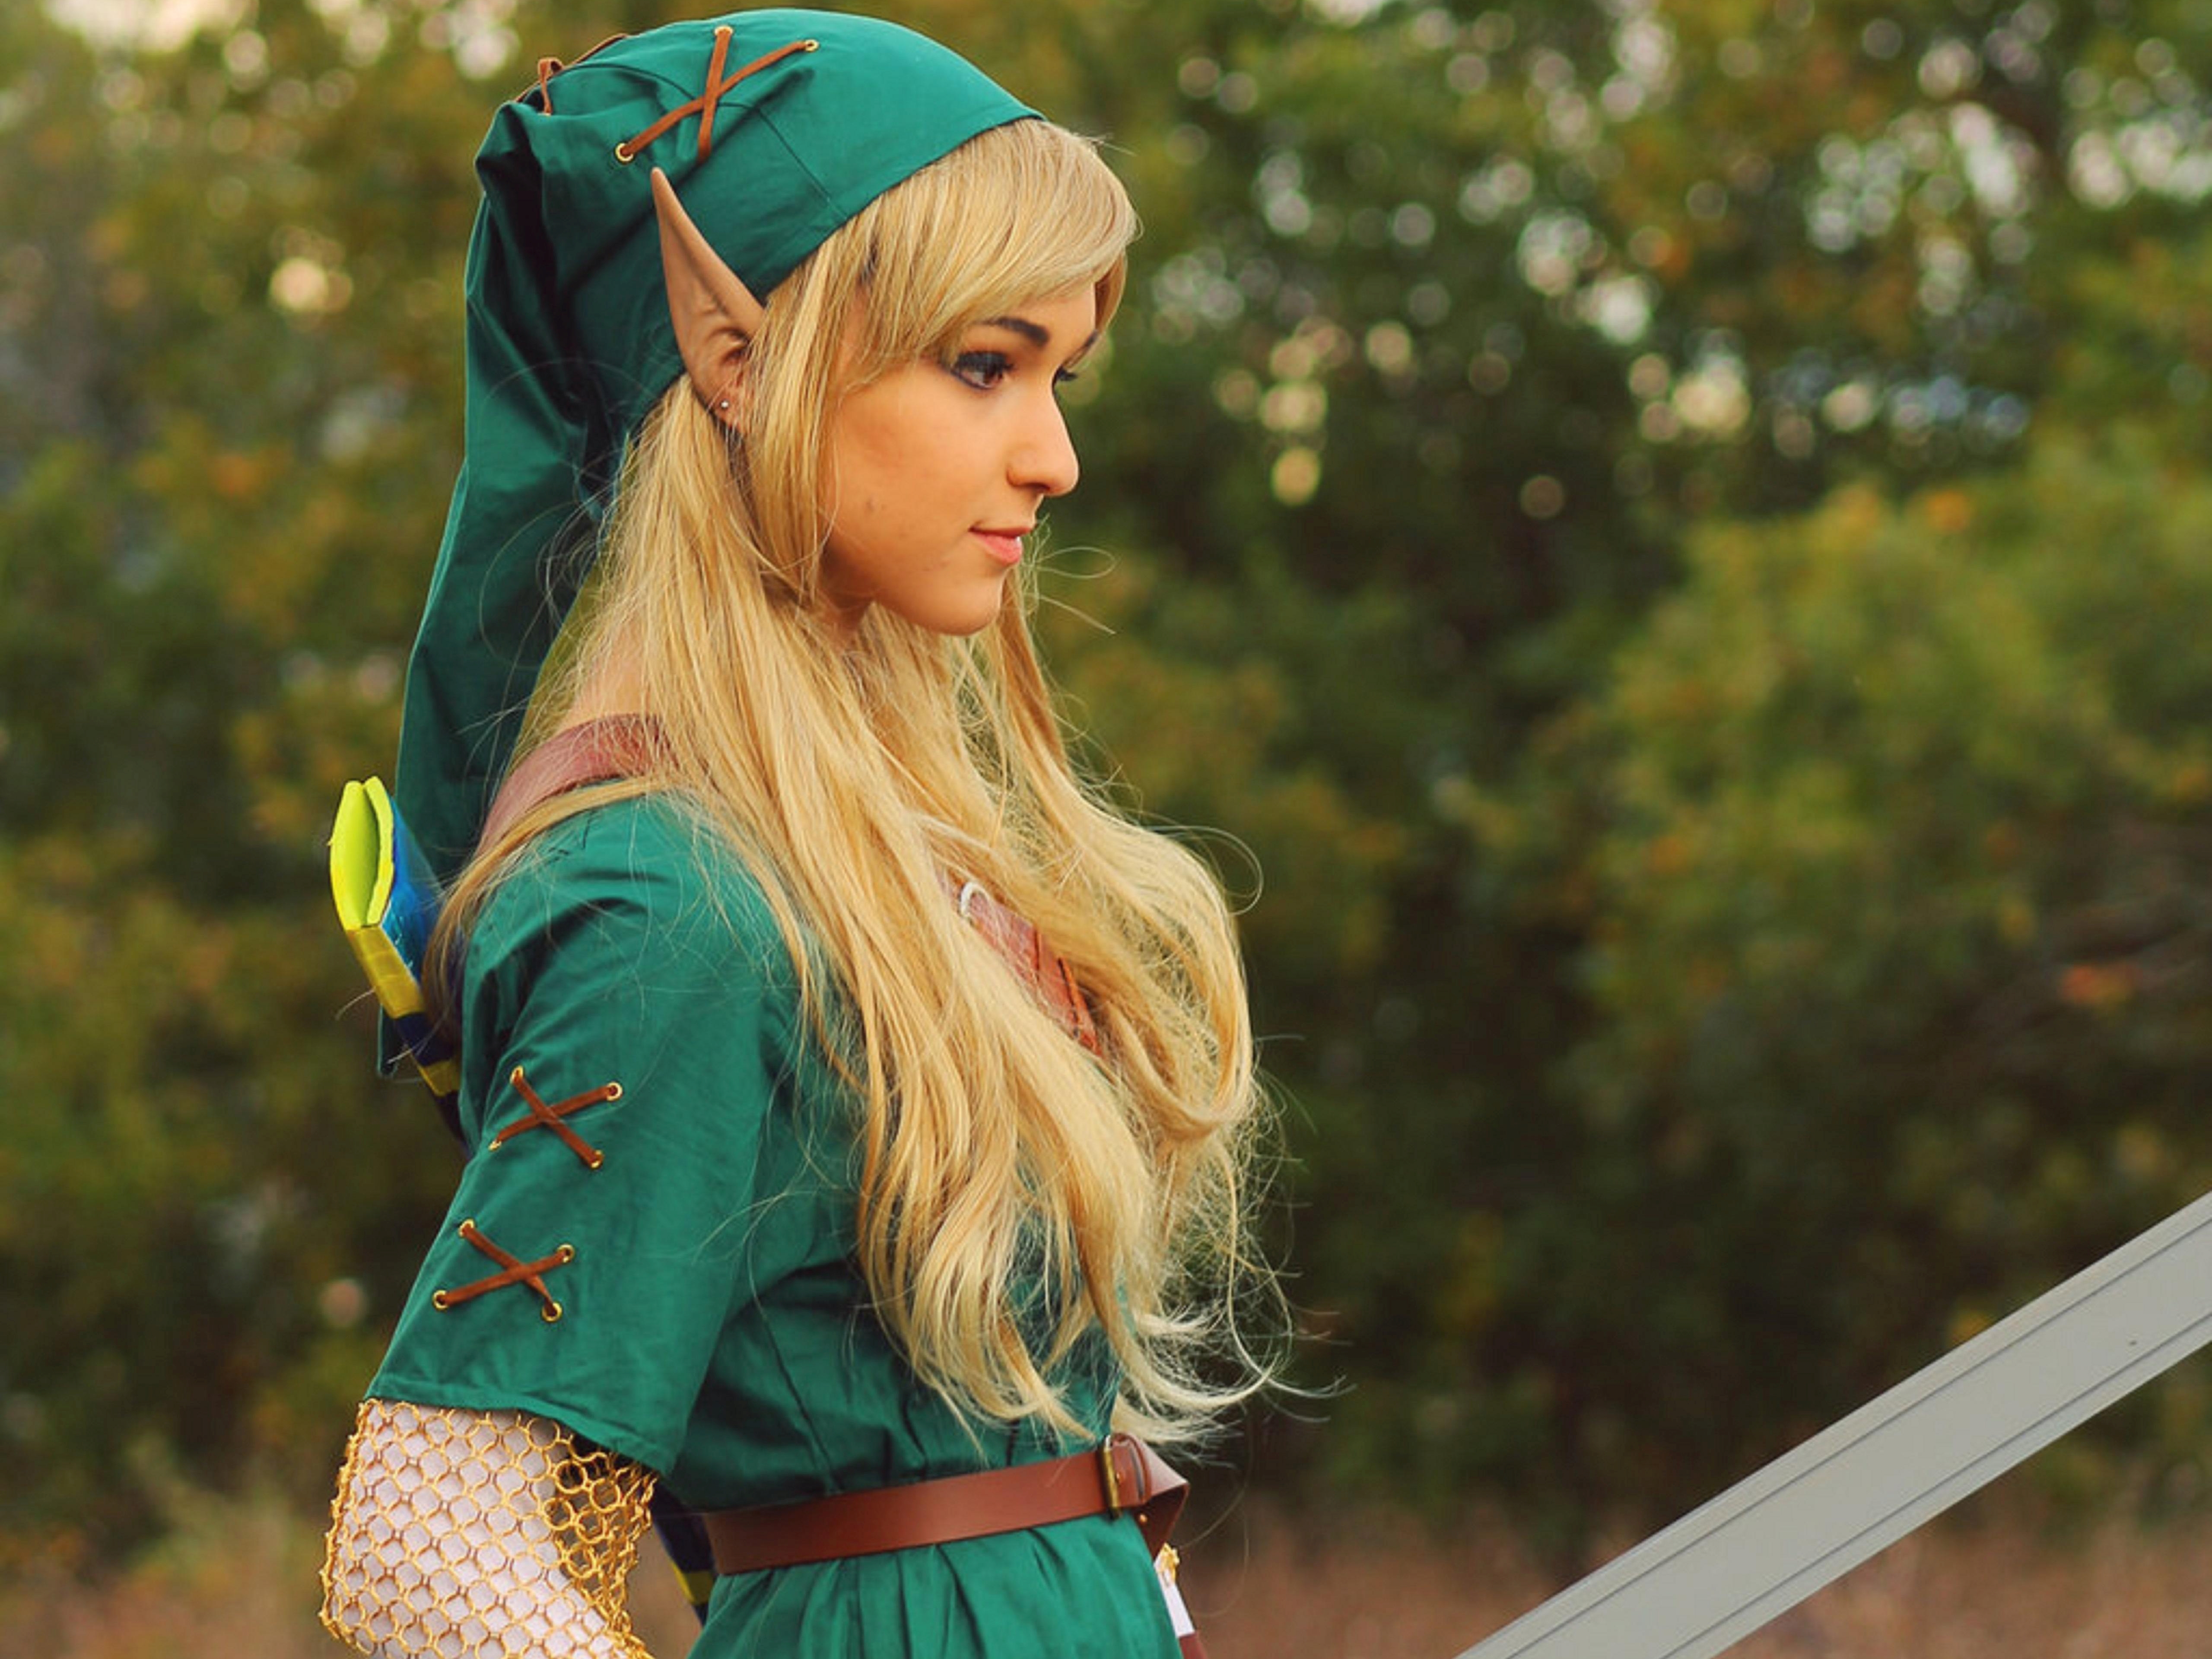 cosplay wallpaper,hair,clothing,turquoise,beauty,fashion